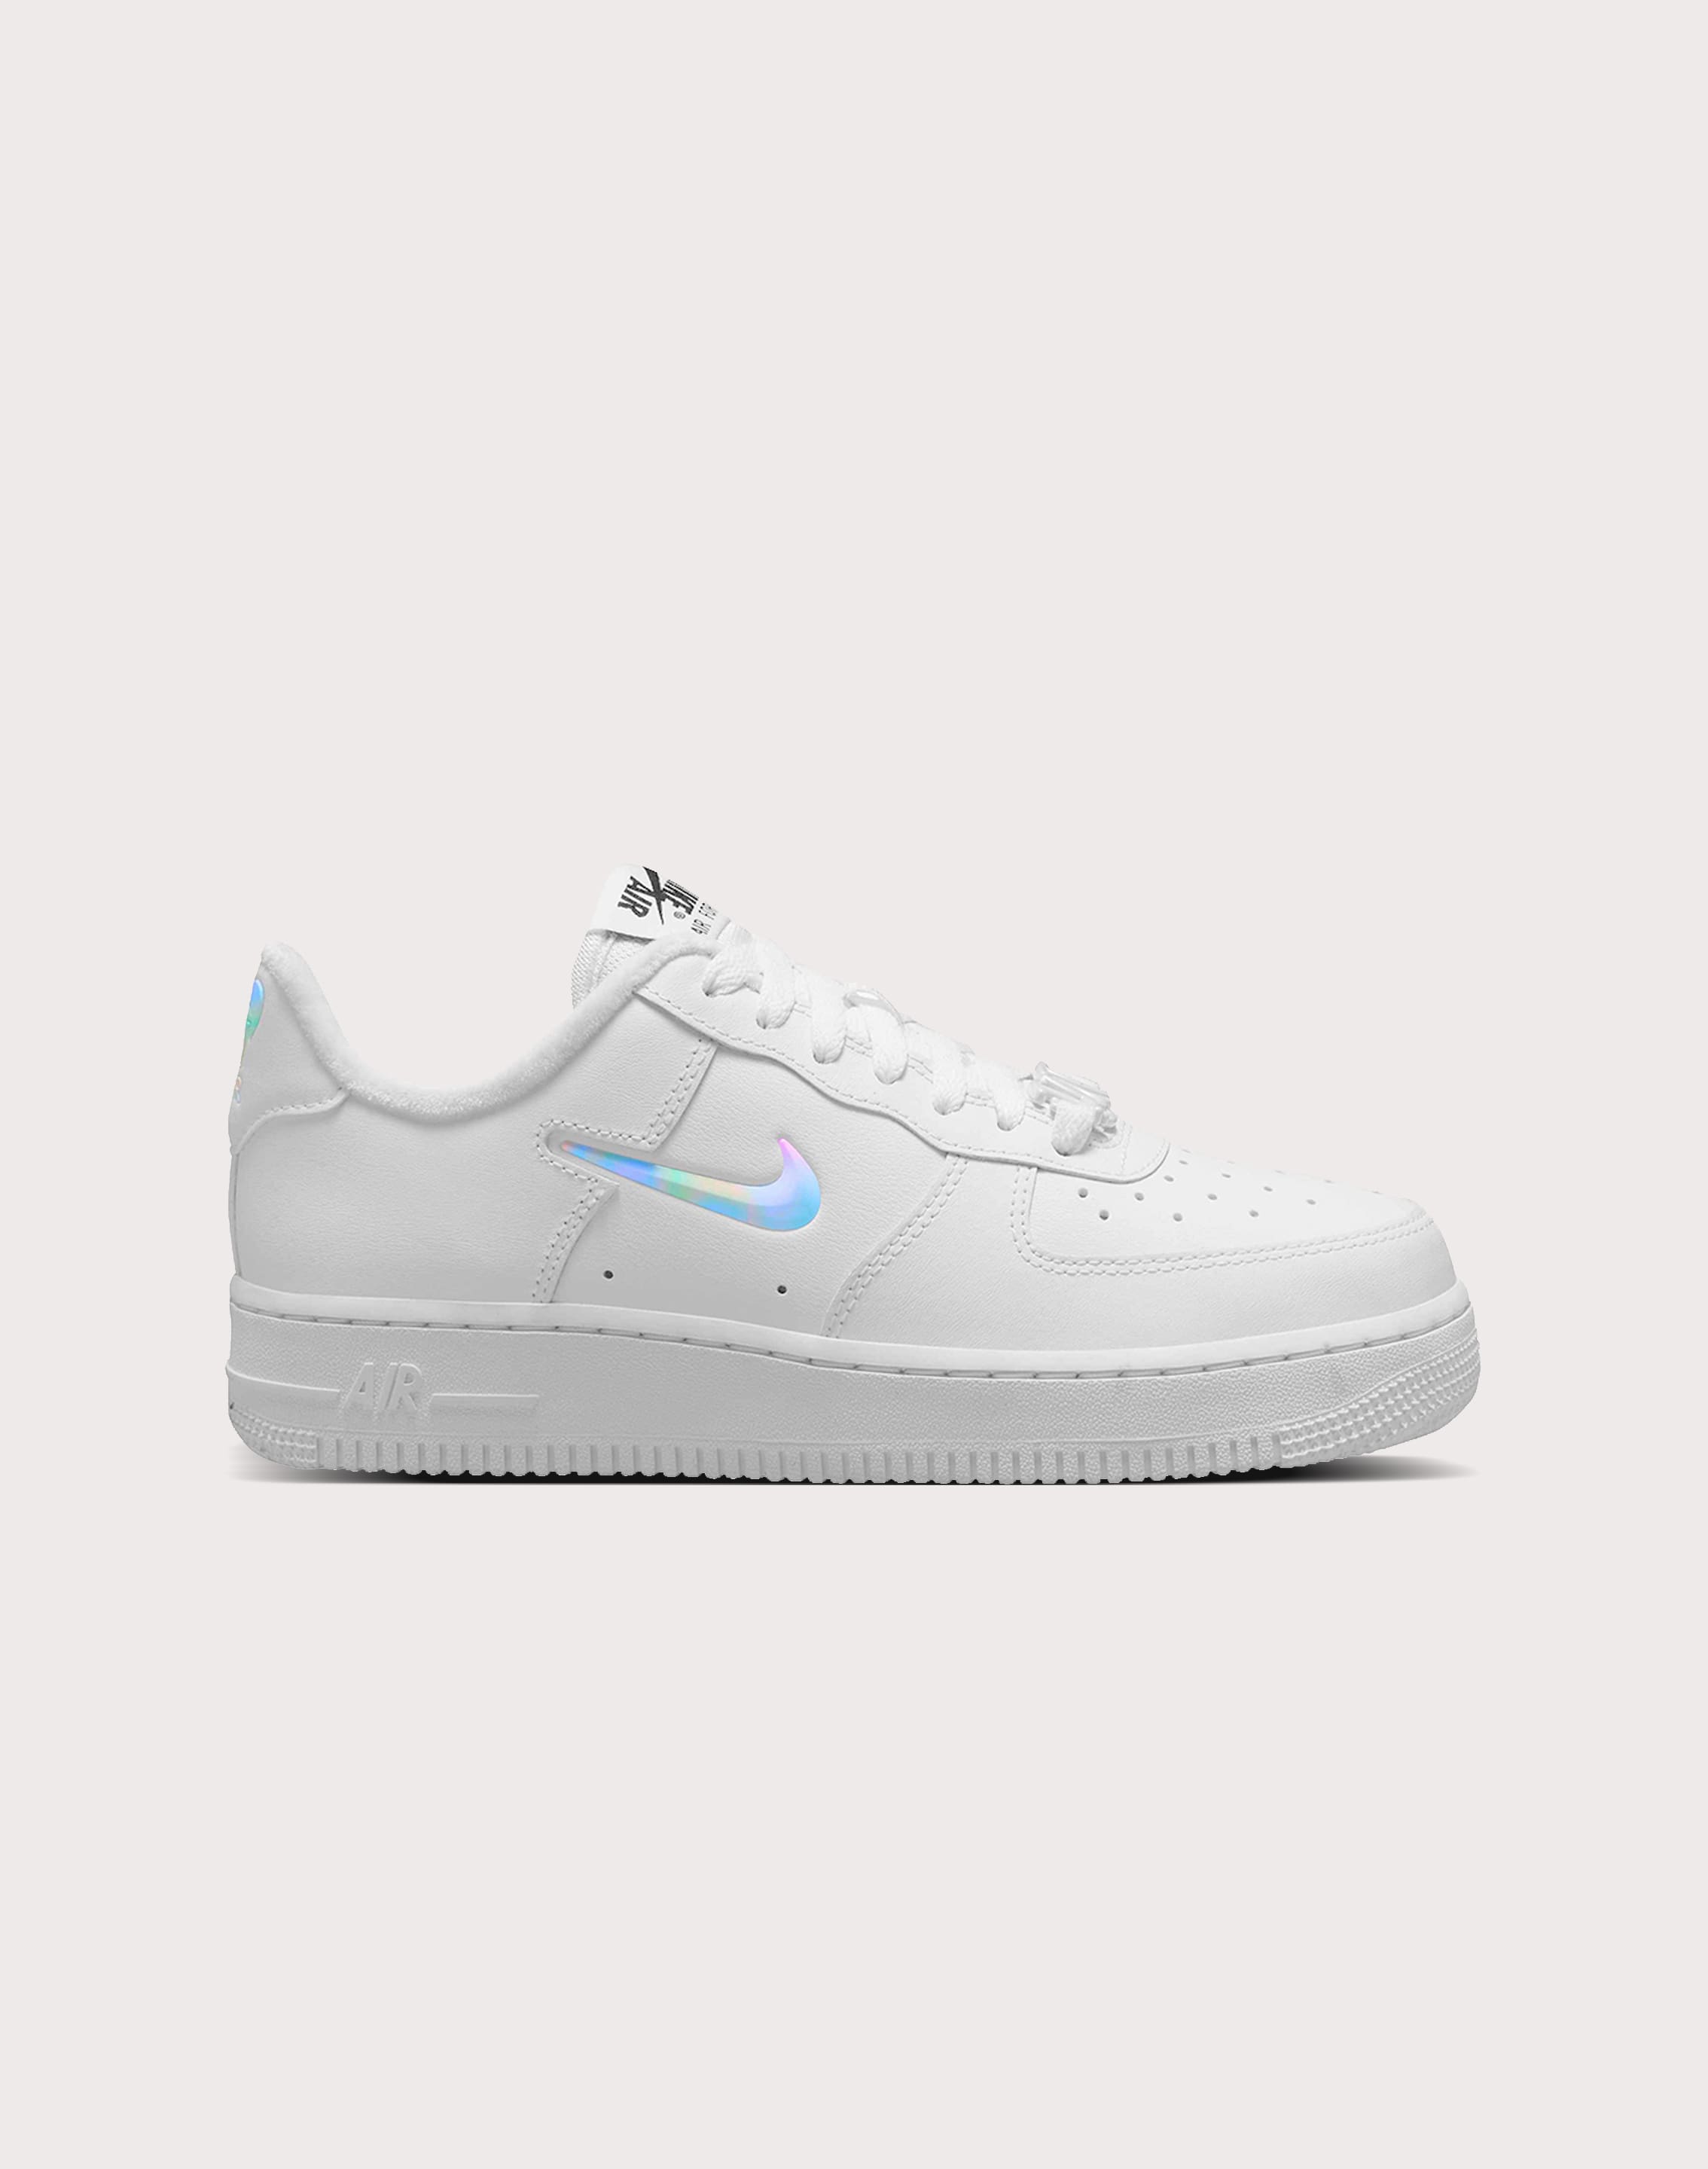 Nike Air Force 1 Low 07 Black Blue, Where To Buy